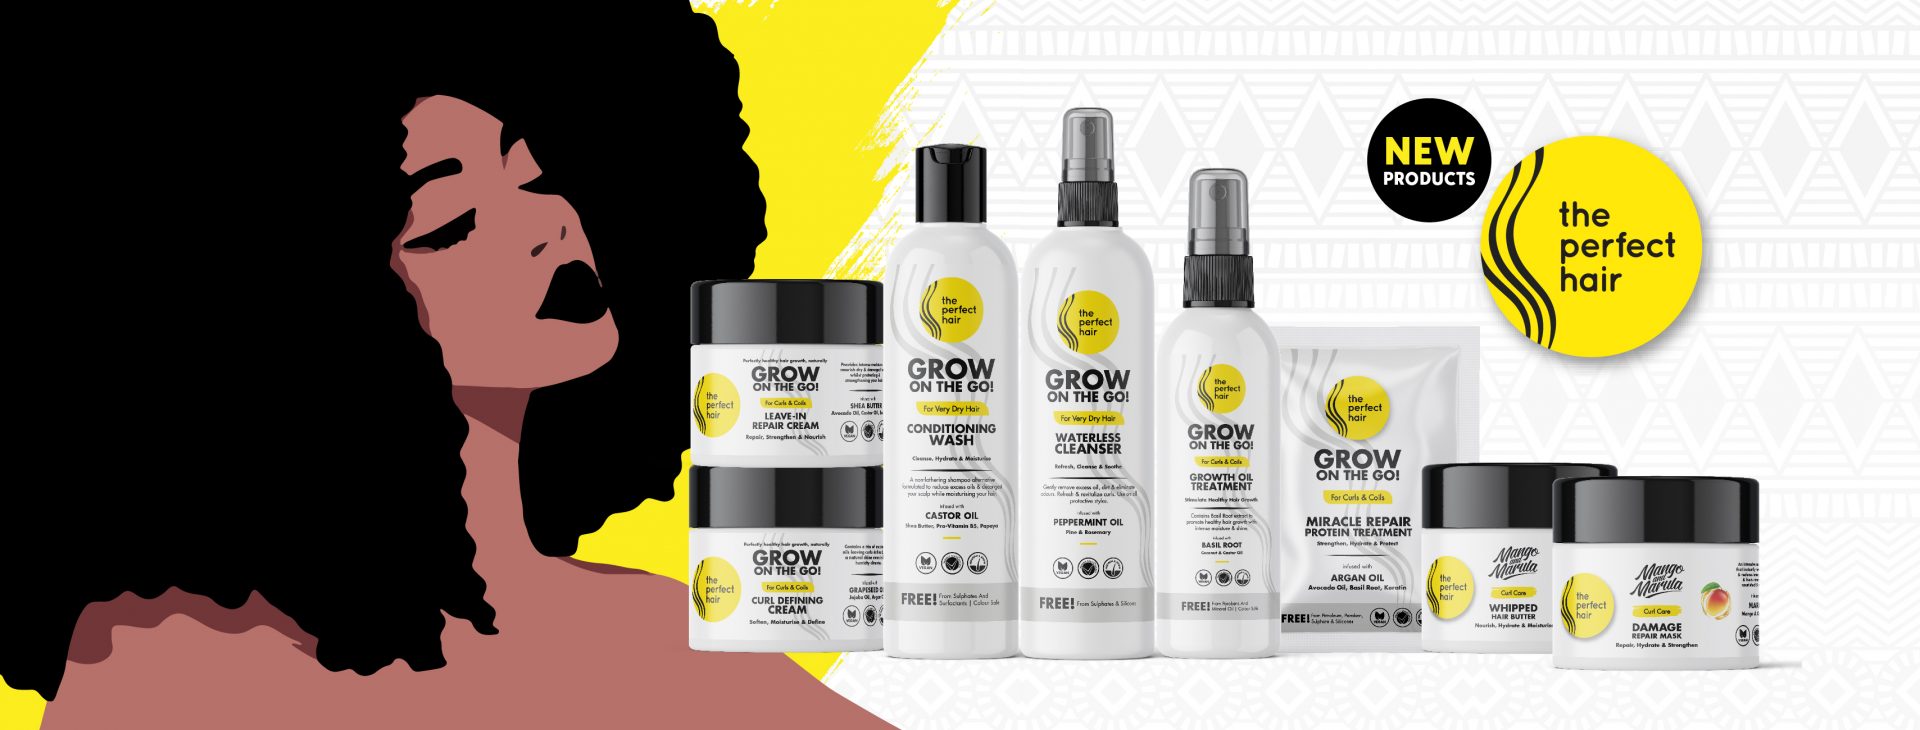 The Perfect Hair launches eight new products to banish winter hair woes 1